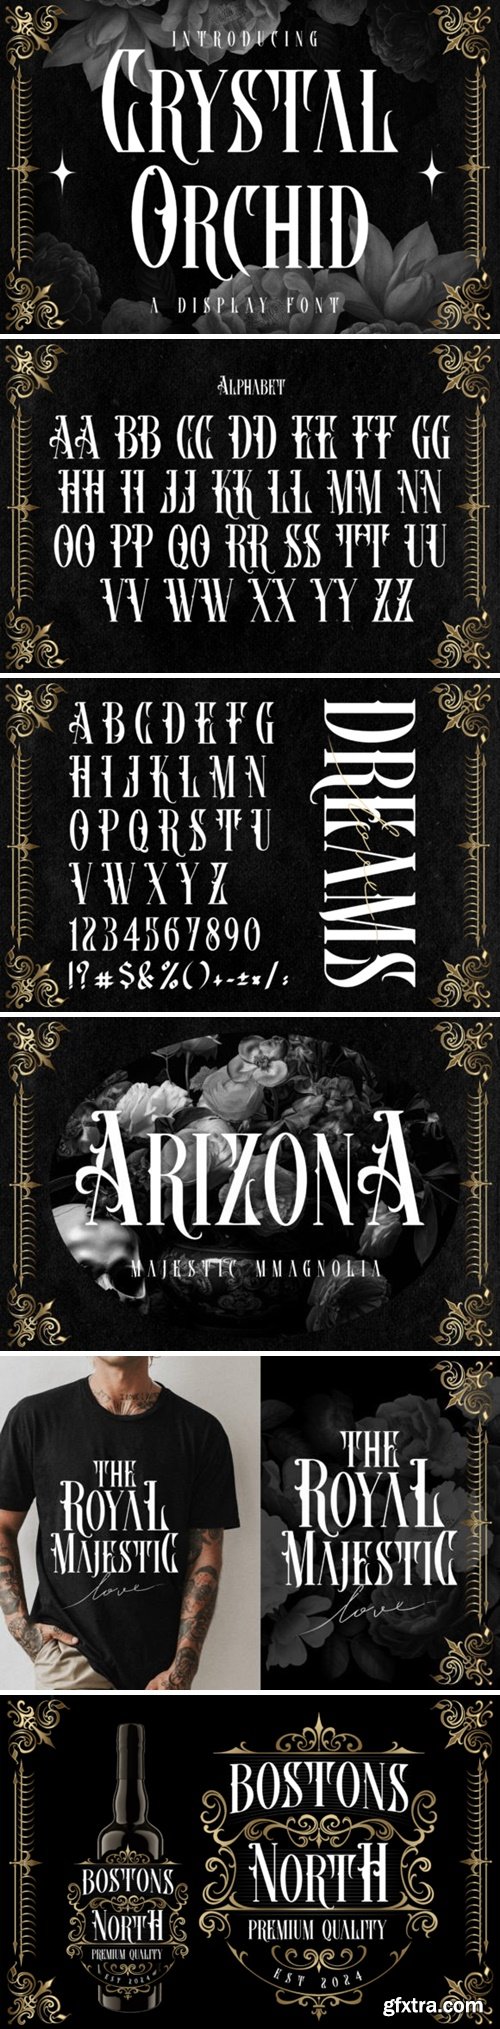 Crystal Orchid Font